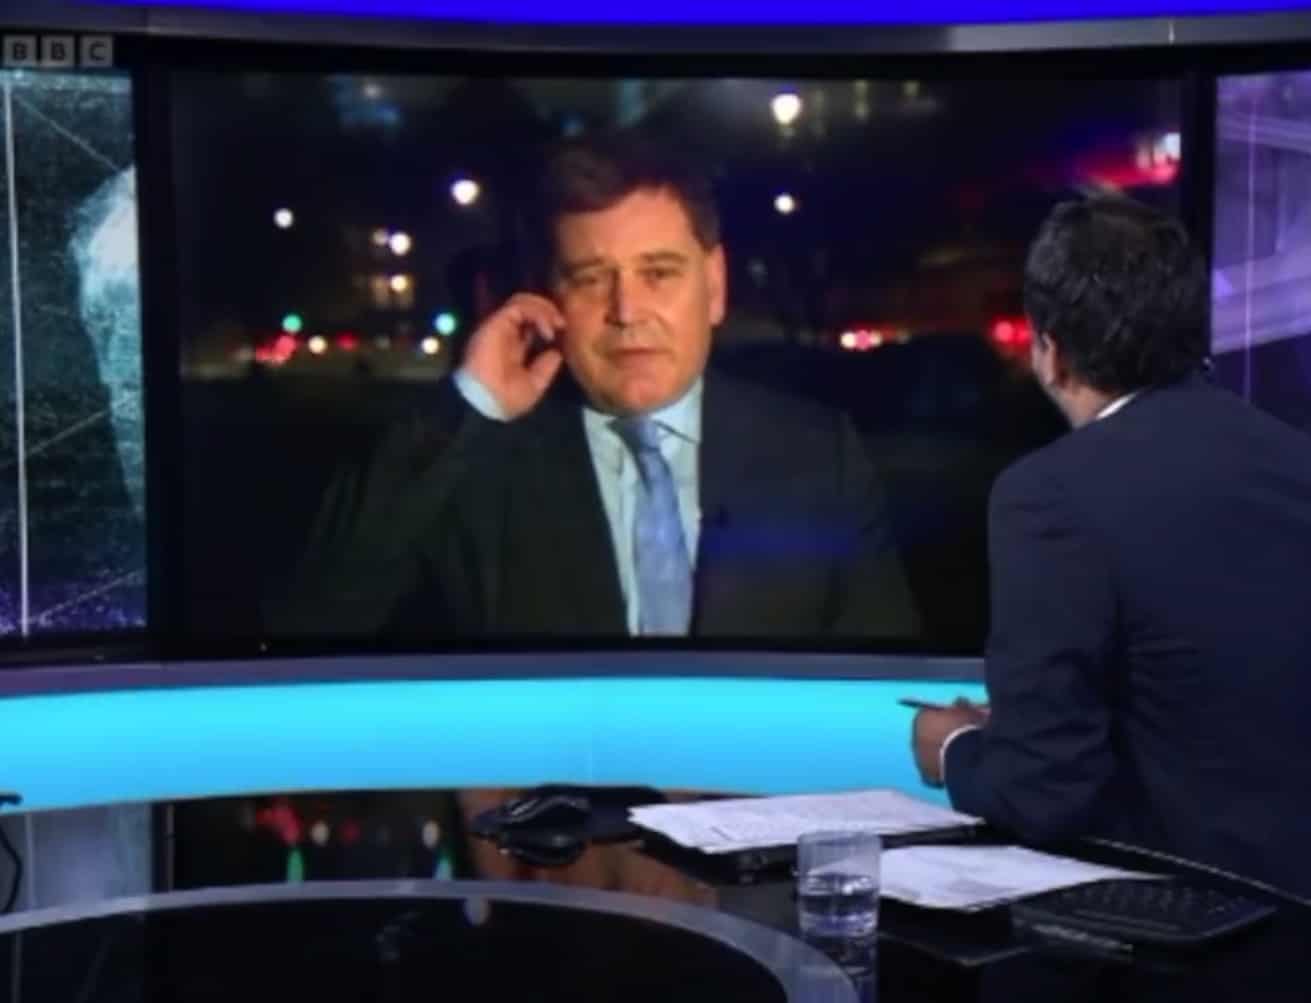 ‘Icing on the cake’: Steve Bray calls Andrew Bridgen a ‘village idiot’ during live TV interview